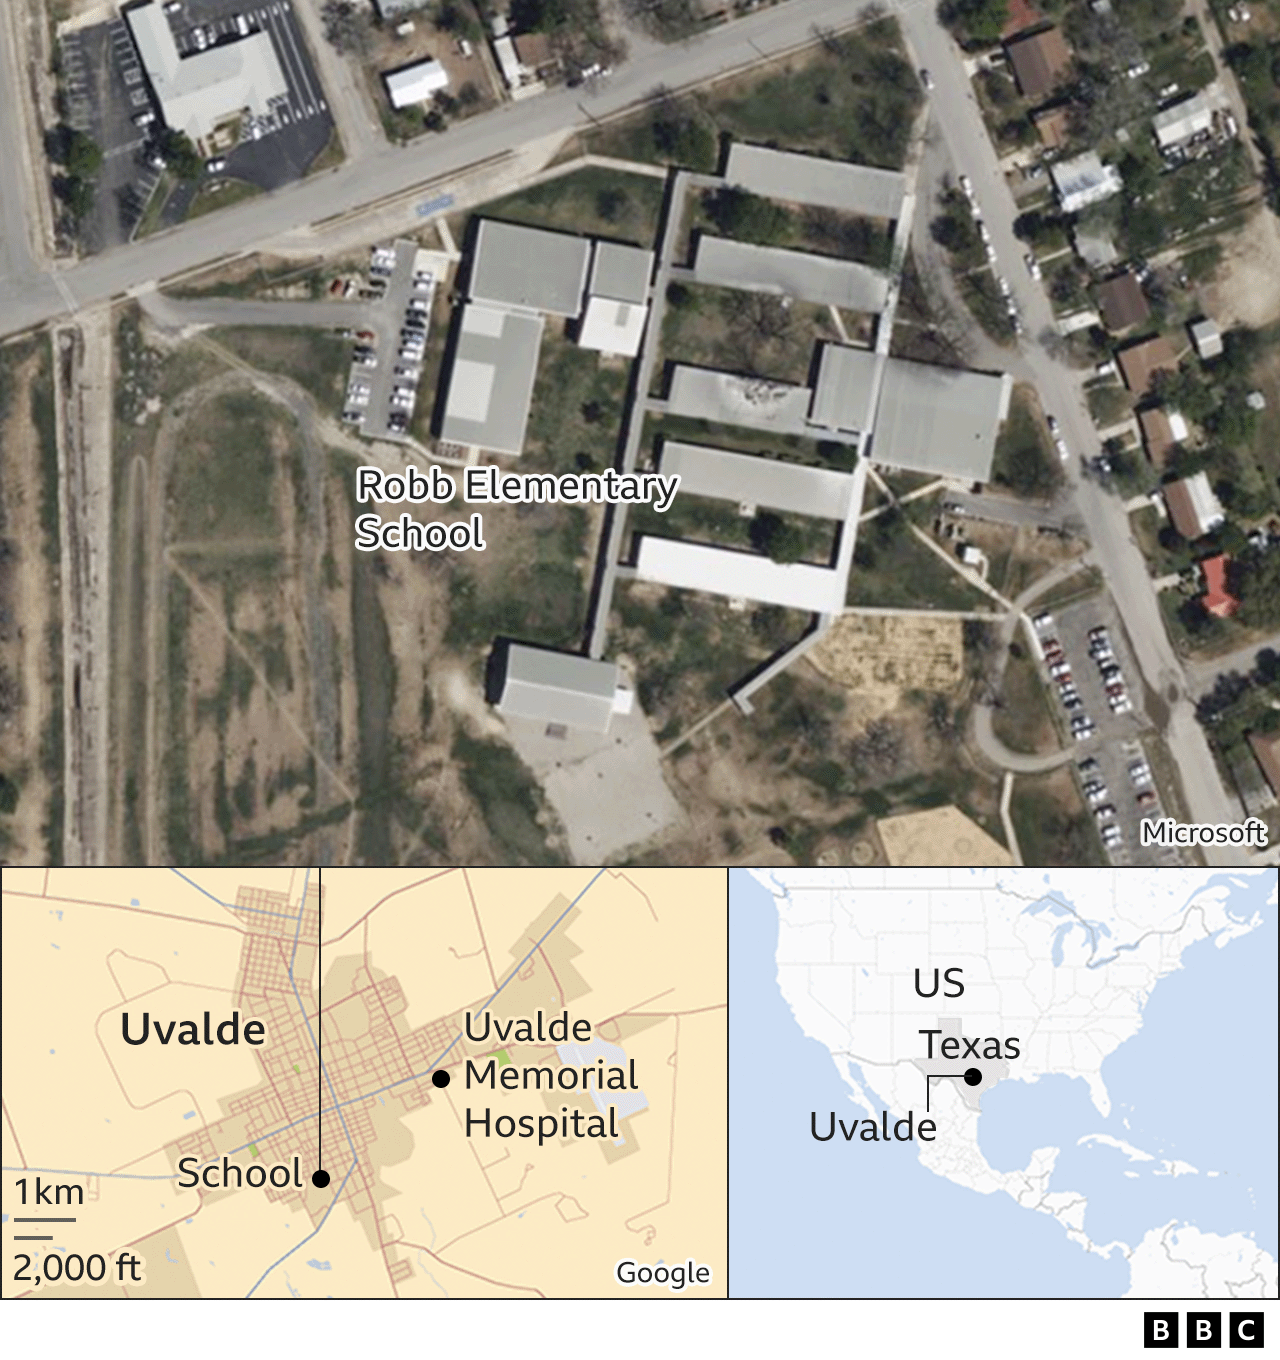 Map showing the location of the Robb Elementary School in Uvalde, Texas